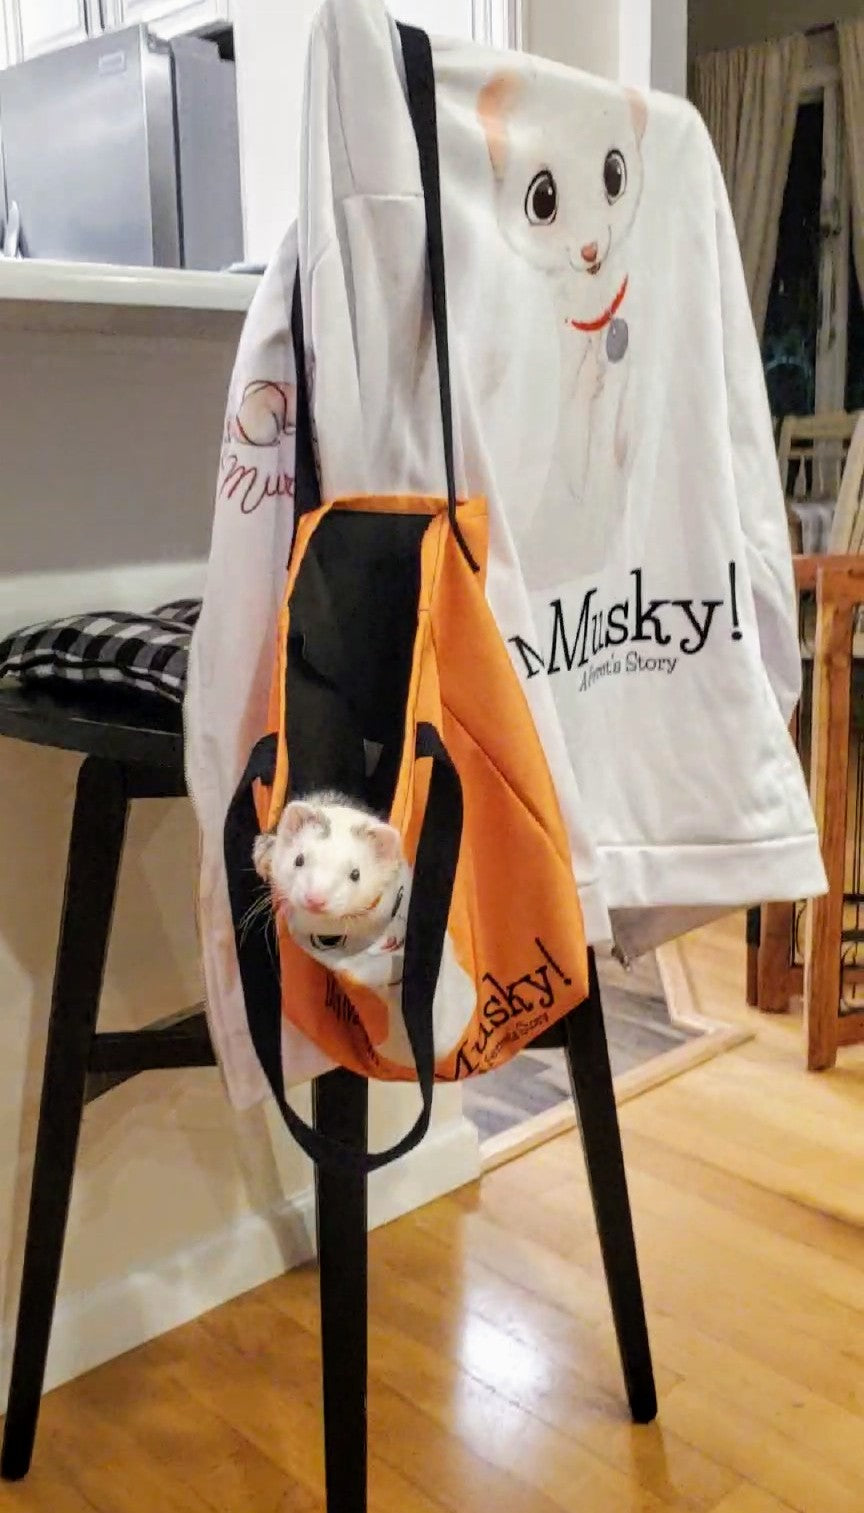 "My Name is Musky! A Ferret's Story" Tote Bag!